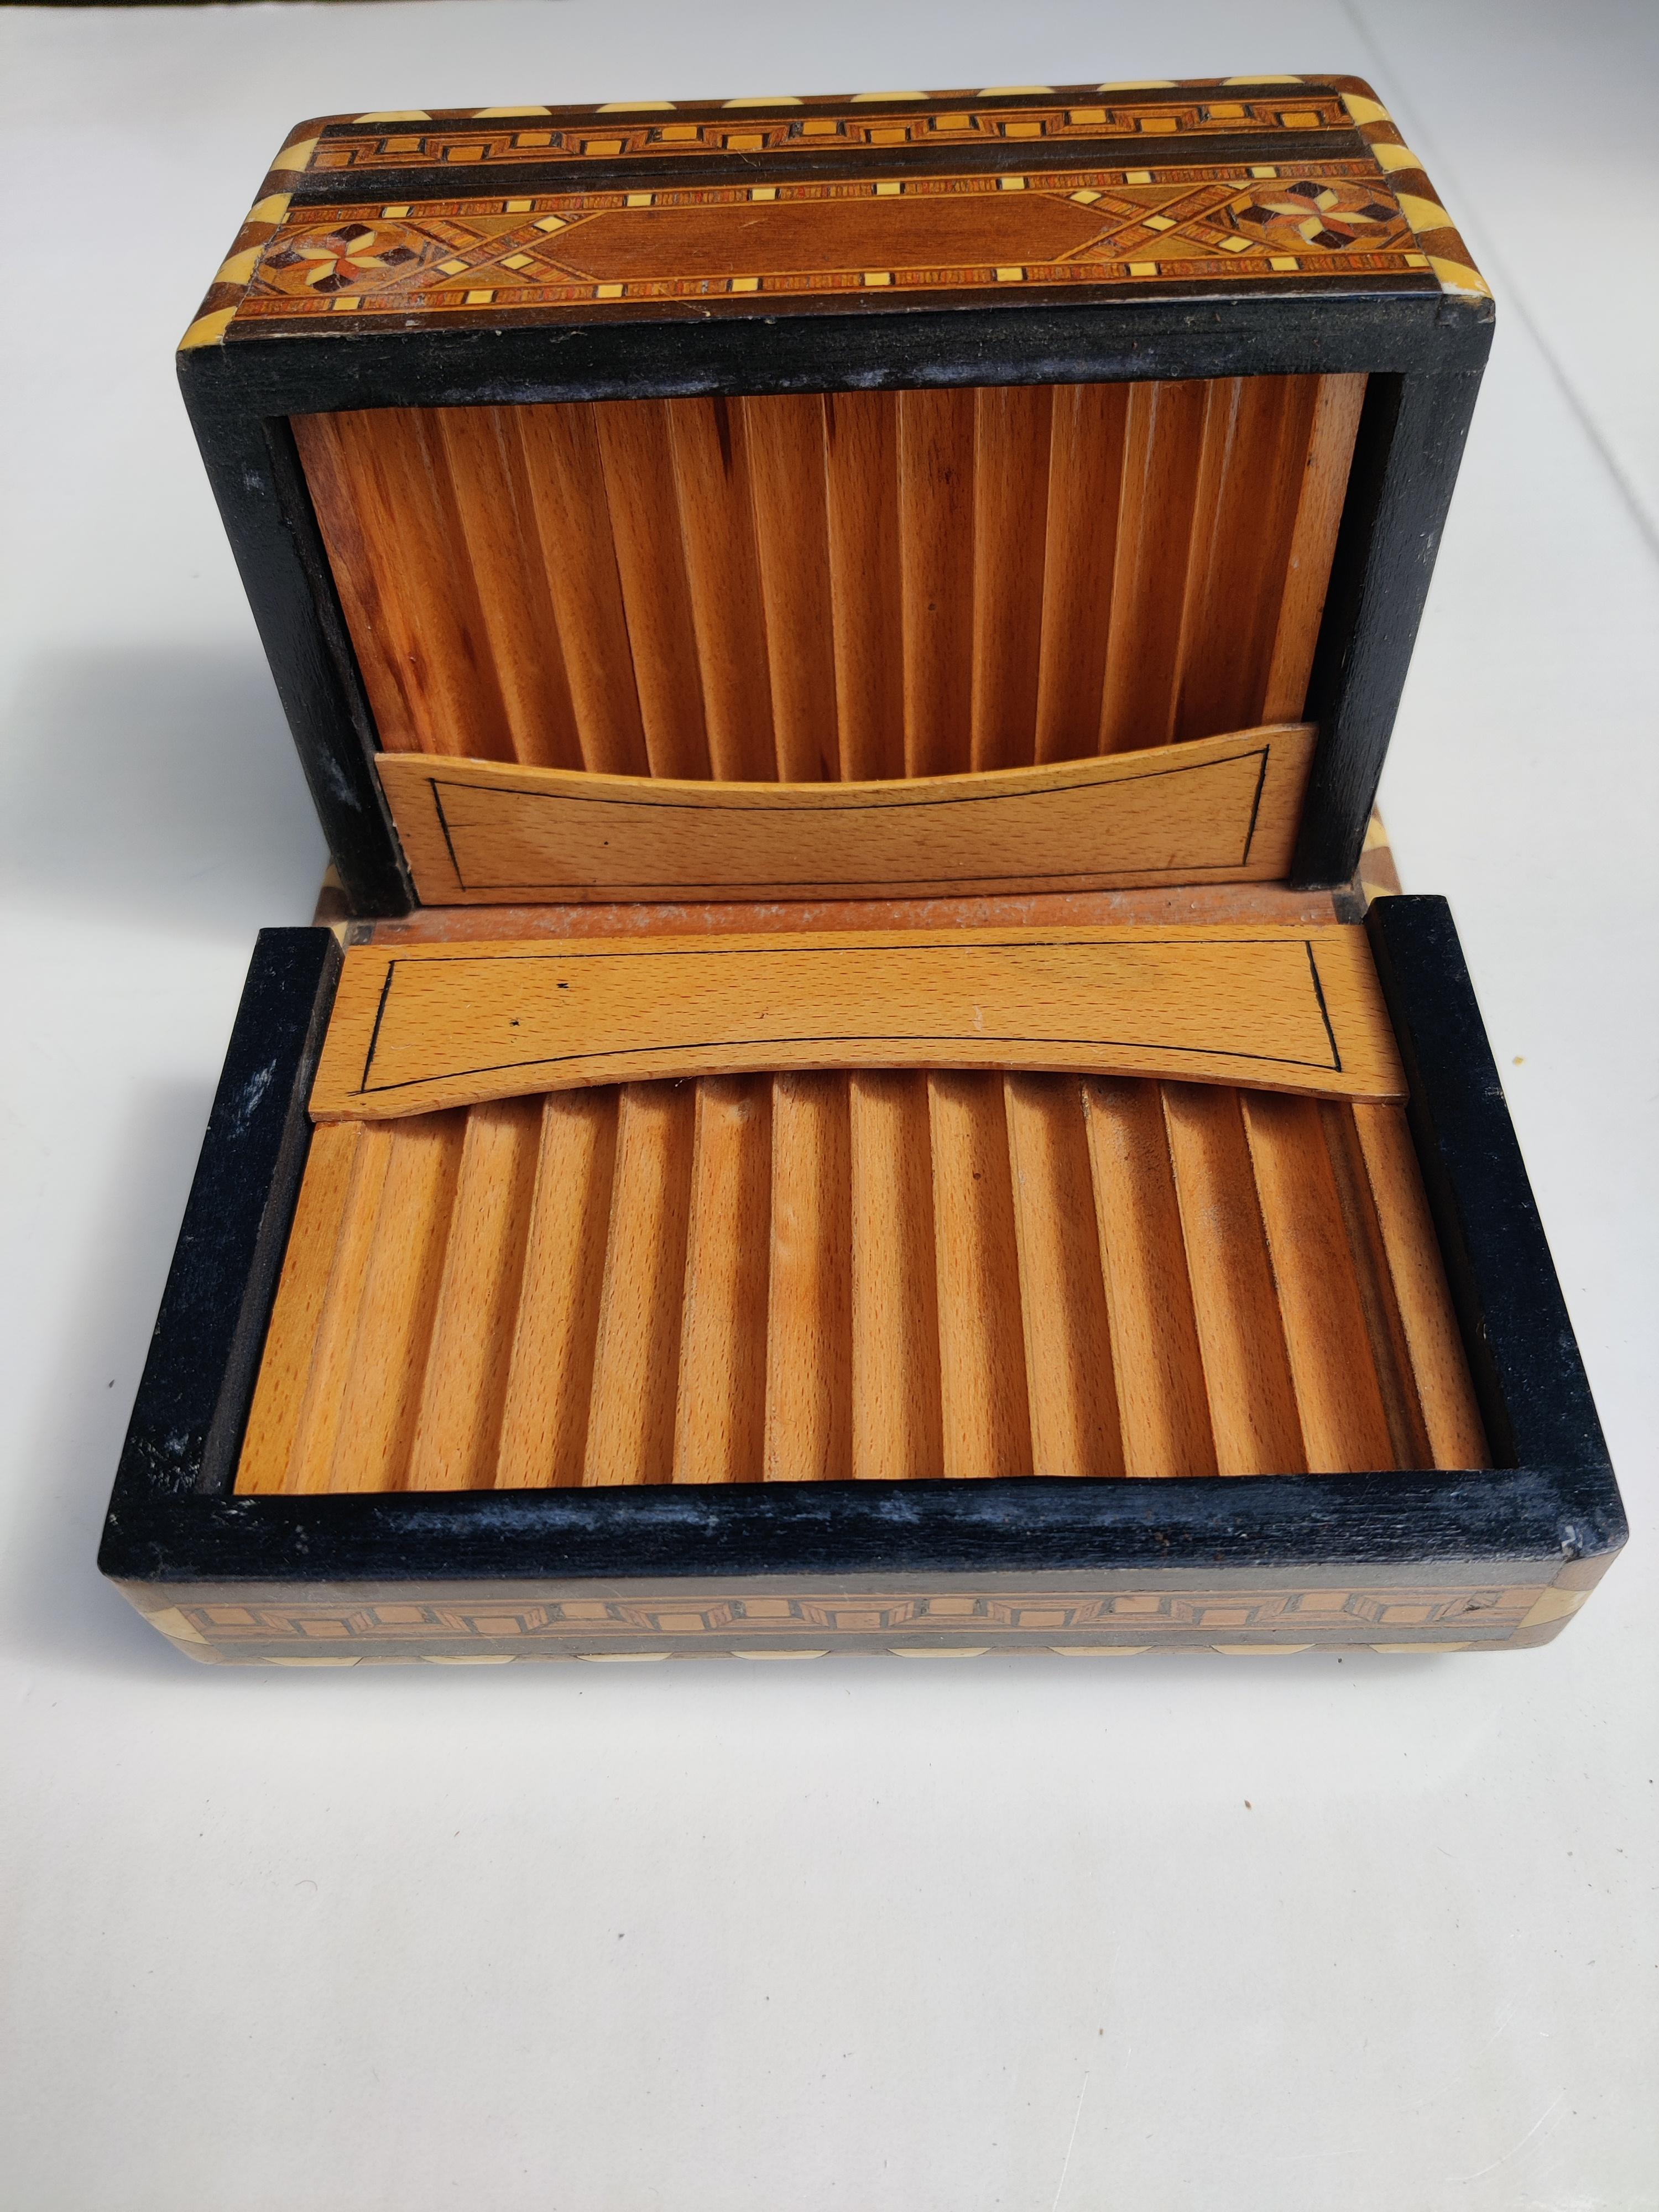 Cigarette box, unusual - opens on both sides
Unsure of maker or age.  Likely Mid Century.
No breaks or repair.
One side is slightly less in height than other side.  